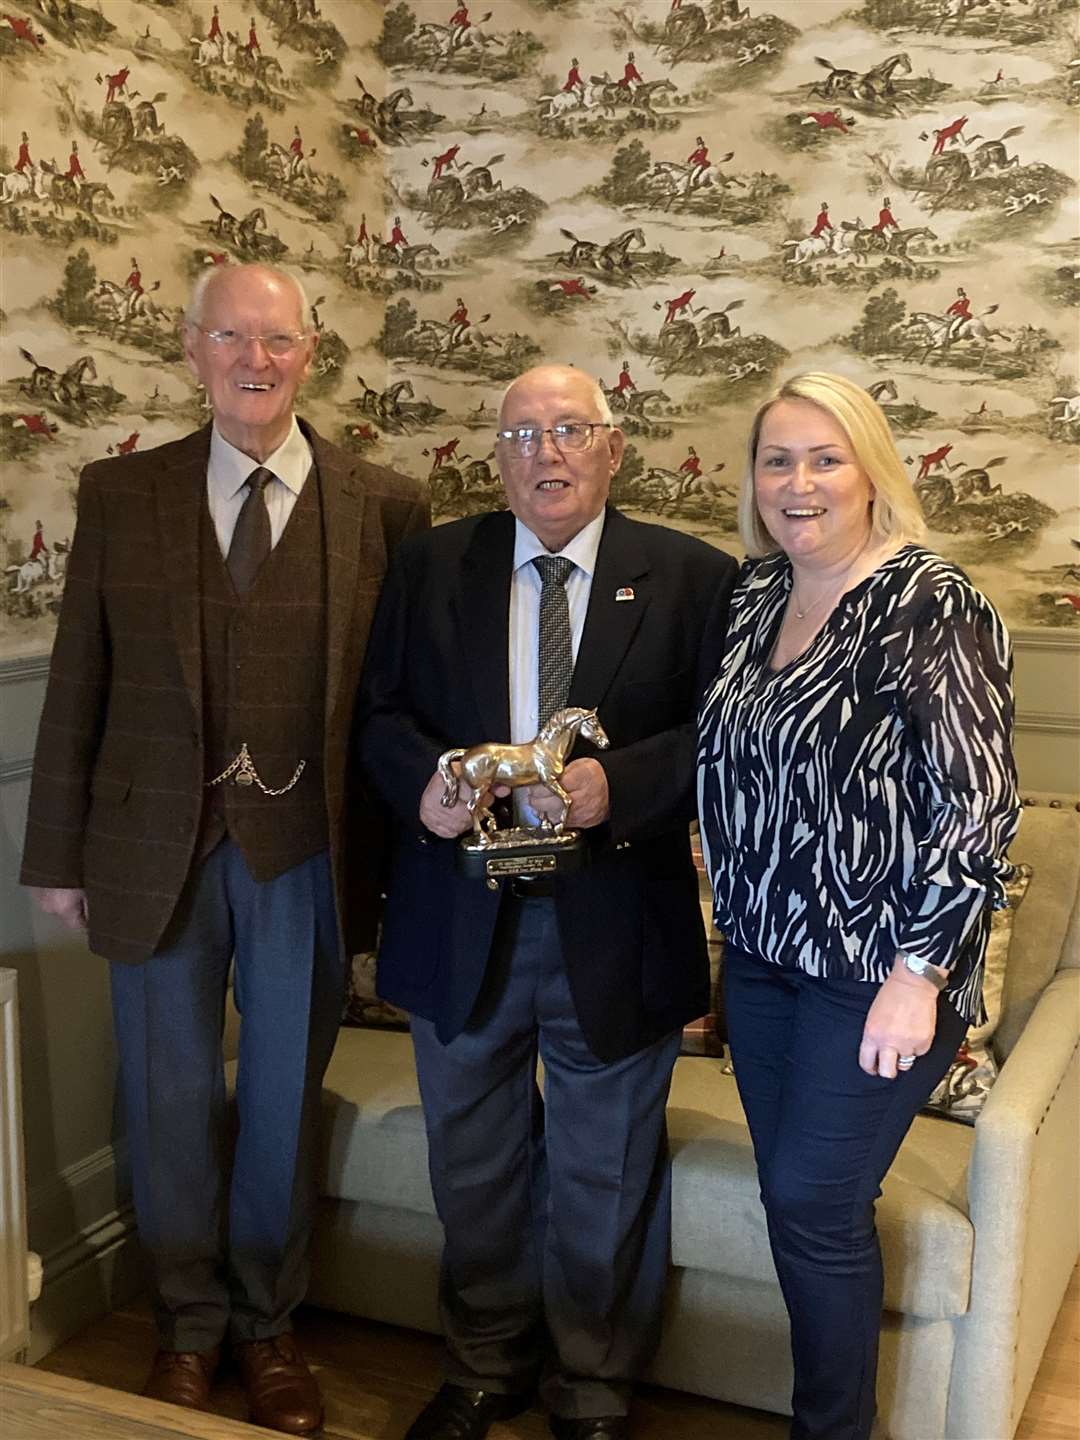 Christie Cameron (centre) received his award in recognition of many years' service to Caithness RDA from Jimmy Johnson, trustee, while group chairperson Judith Miller looked on.